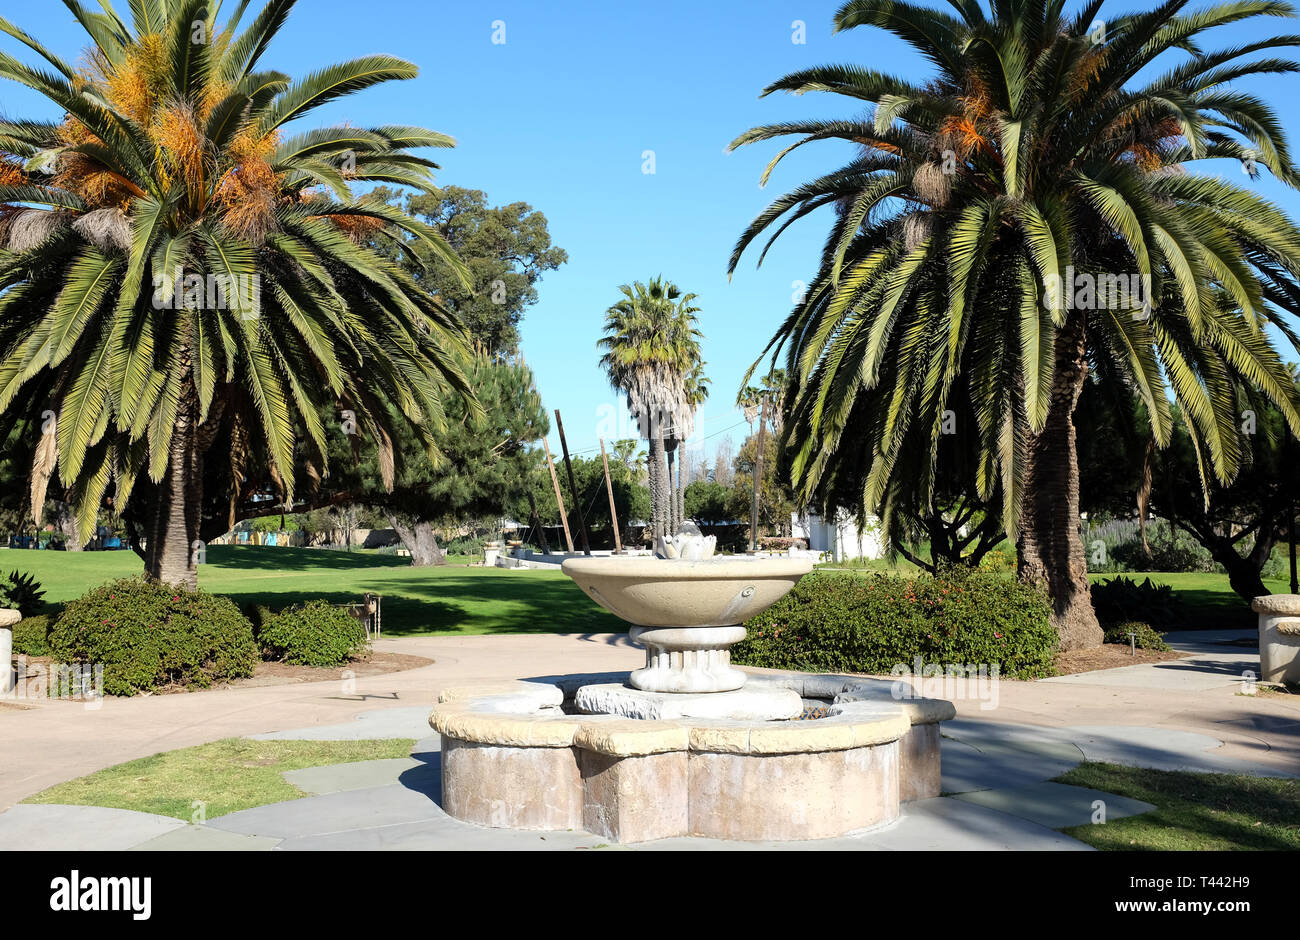 SANTA BARBARA, CALIFORNIA - APRIL 11, 2019: Chase Palm Park fountain and palm trees. A public park along the waterfront with play areas, pond, picnic  Stock Photo